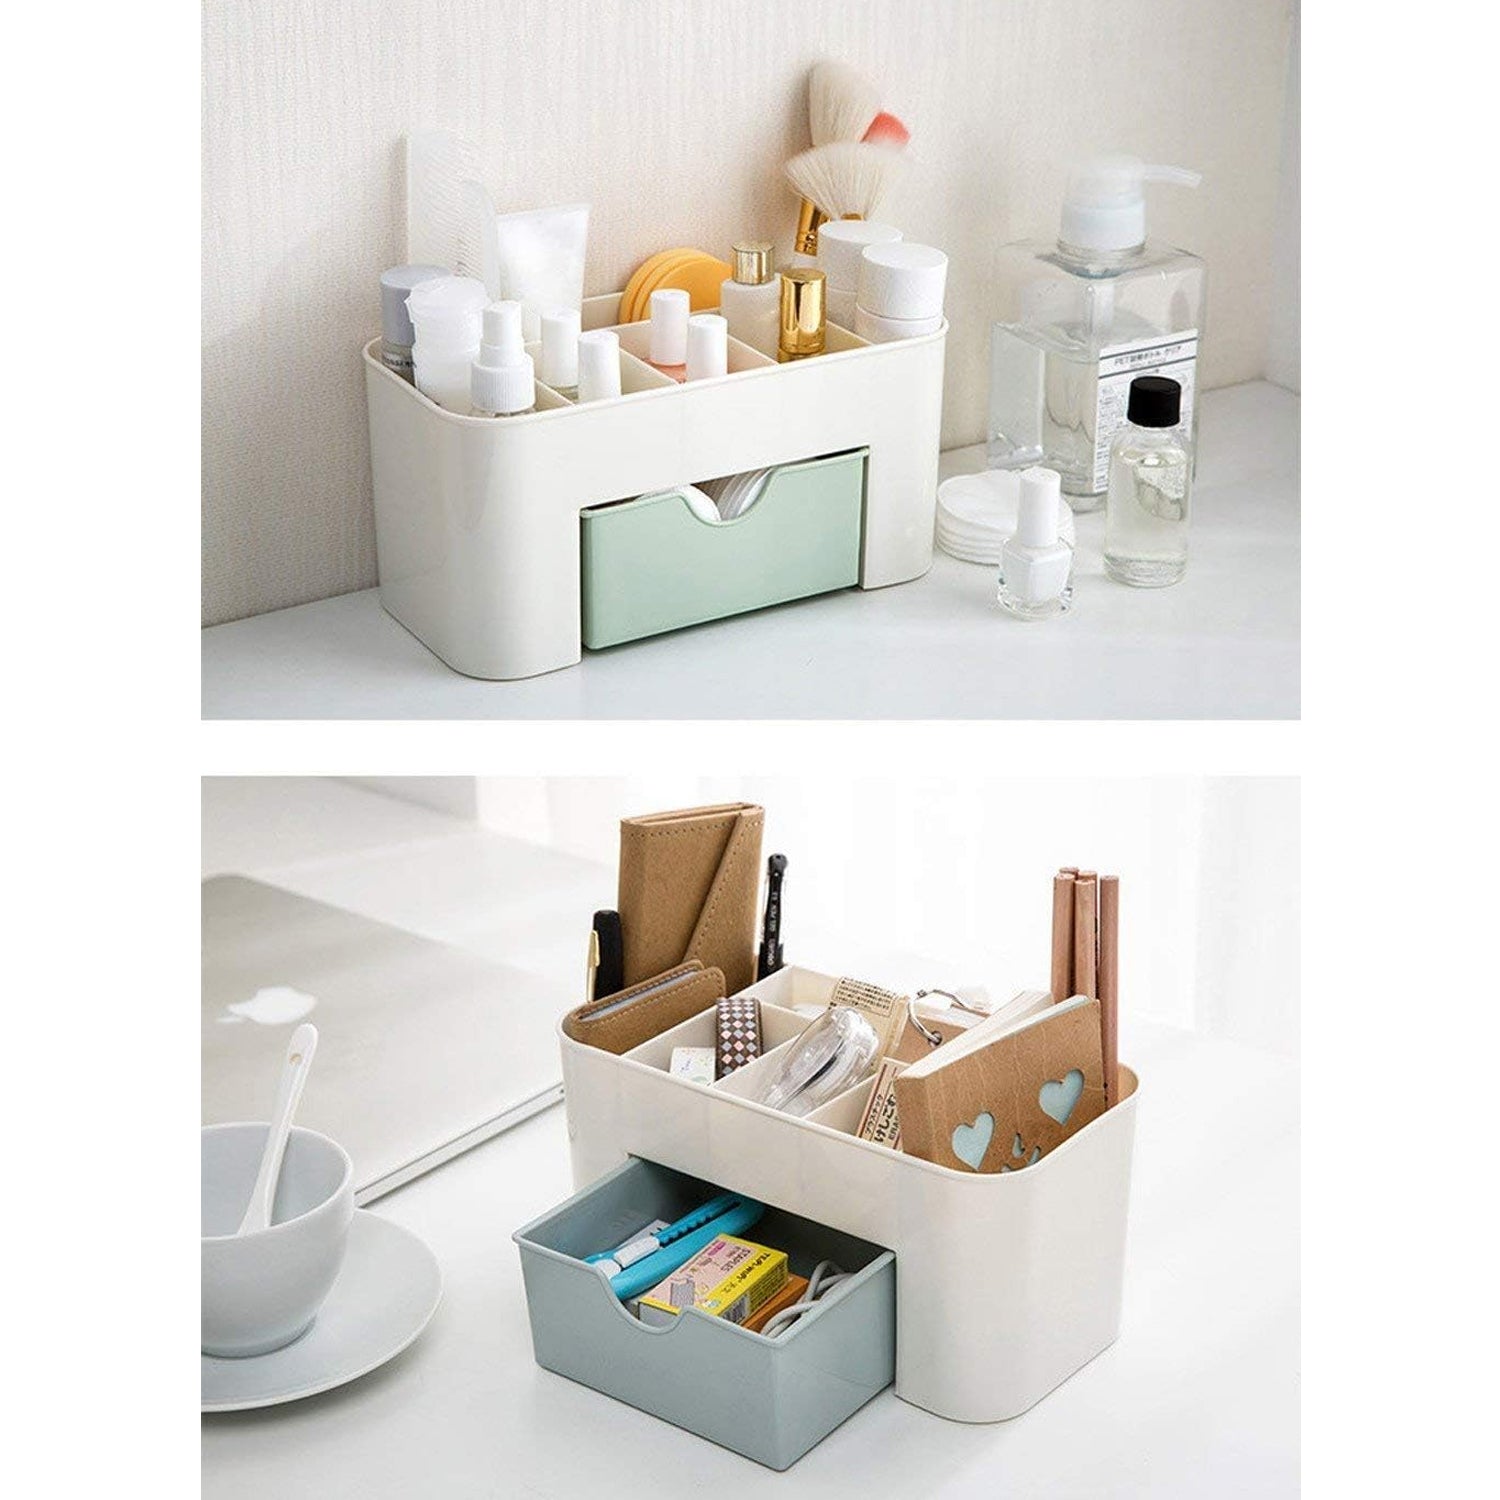 0360B Cutlery Box Used for storing makeup Equipments and kits used by Womens and ladies. DeoDap